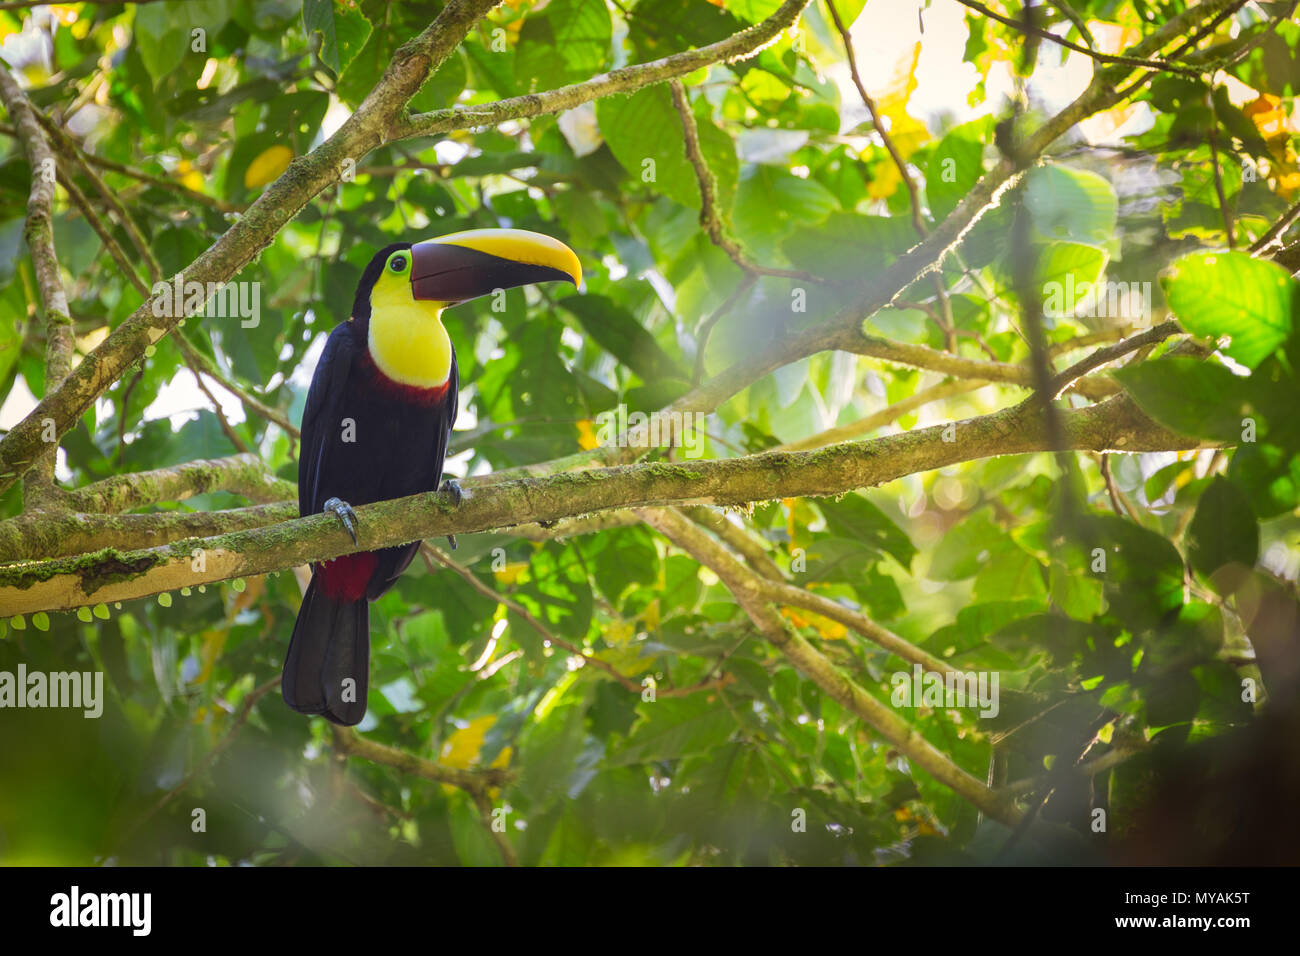 chestnut-mandibled toucan ( Ramphastos swainsonii ) on a branch / in the natural rainforest habitat Stock Photo